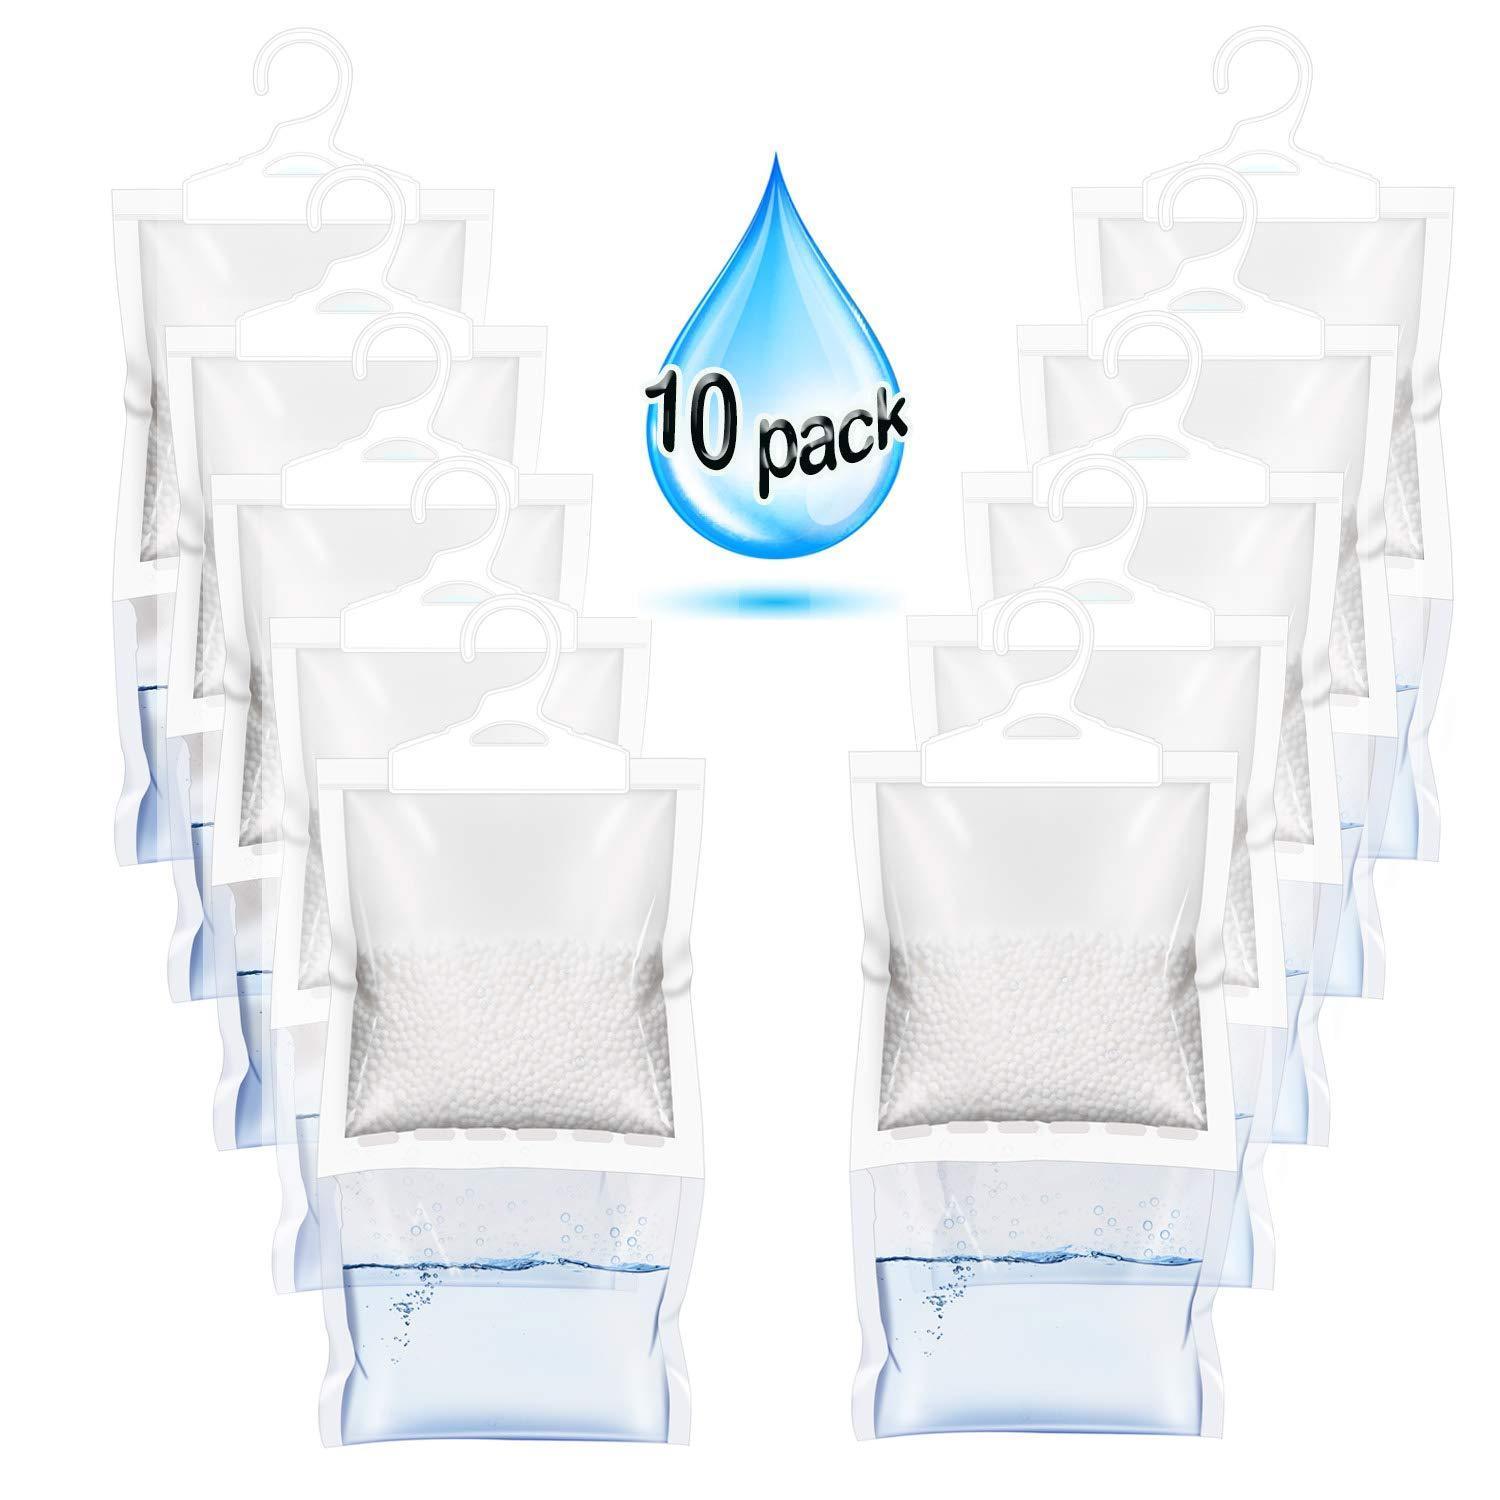 Discover zmfh 10 pack moisture absorber hanging bags no scent max odor eliminator 220g dehumidification bags for closets bathrooms laundry rooms pantries storage